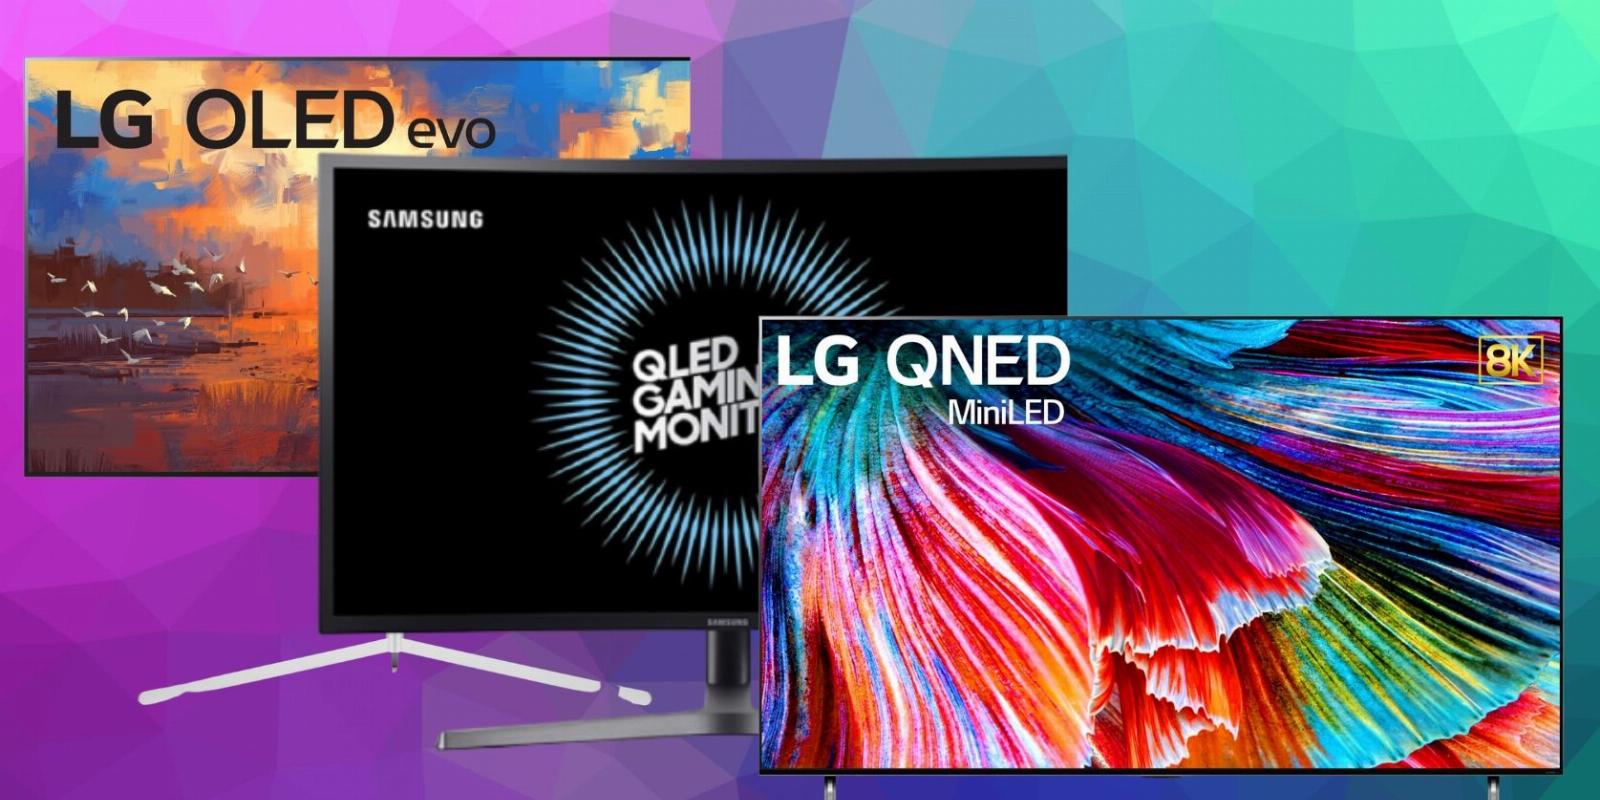 QNED vs. OLED vs. QLED: What Is the Difference and Which Is Best?